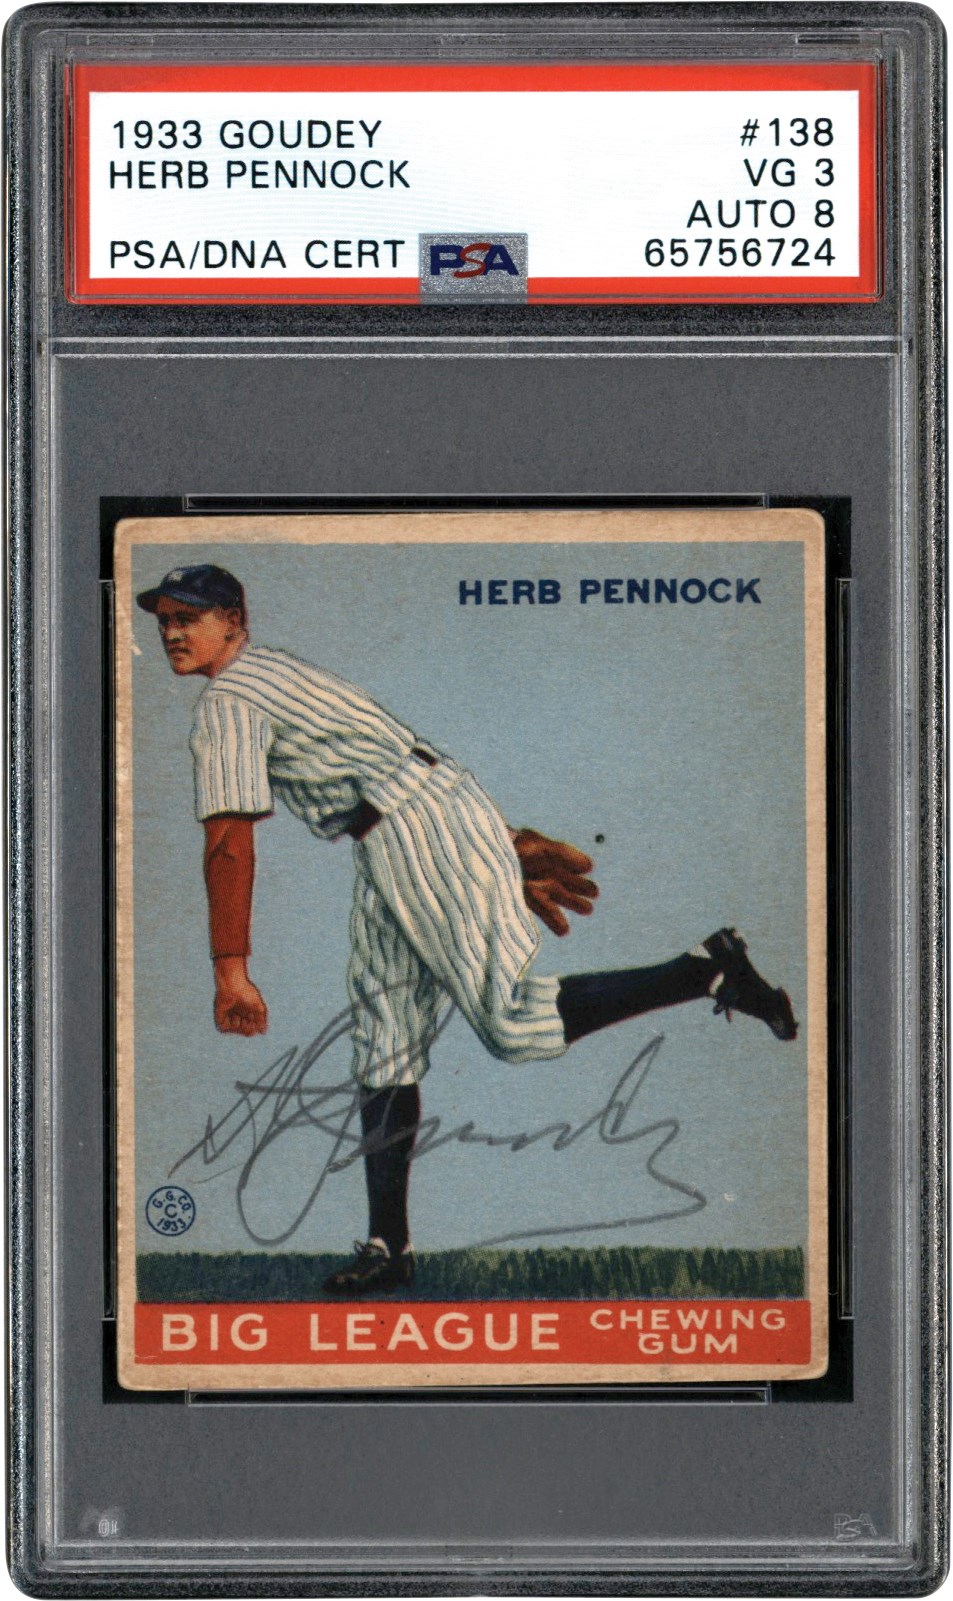 - Signed 1933  Goudey #138 Herb Pennock PSA VG 3 Auto 8 (Pop 1 of 1 - One Higher)